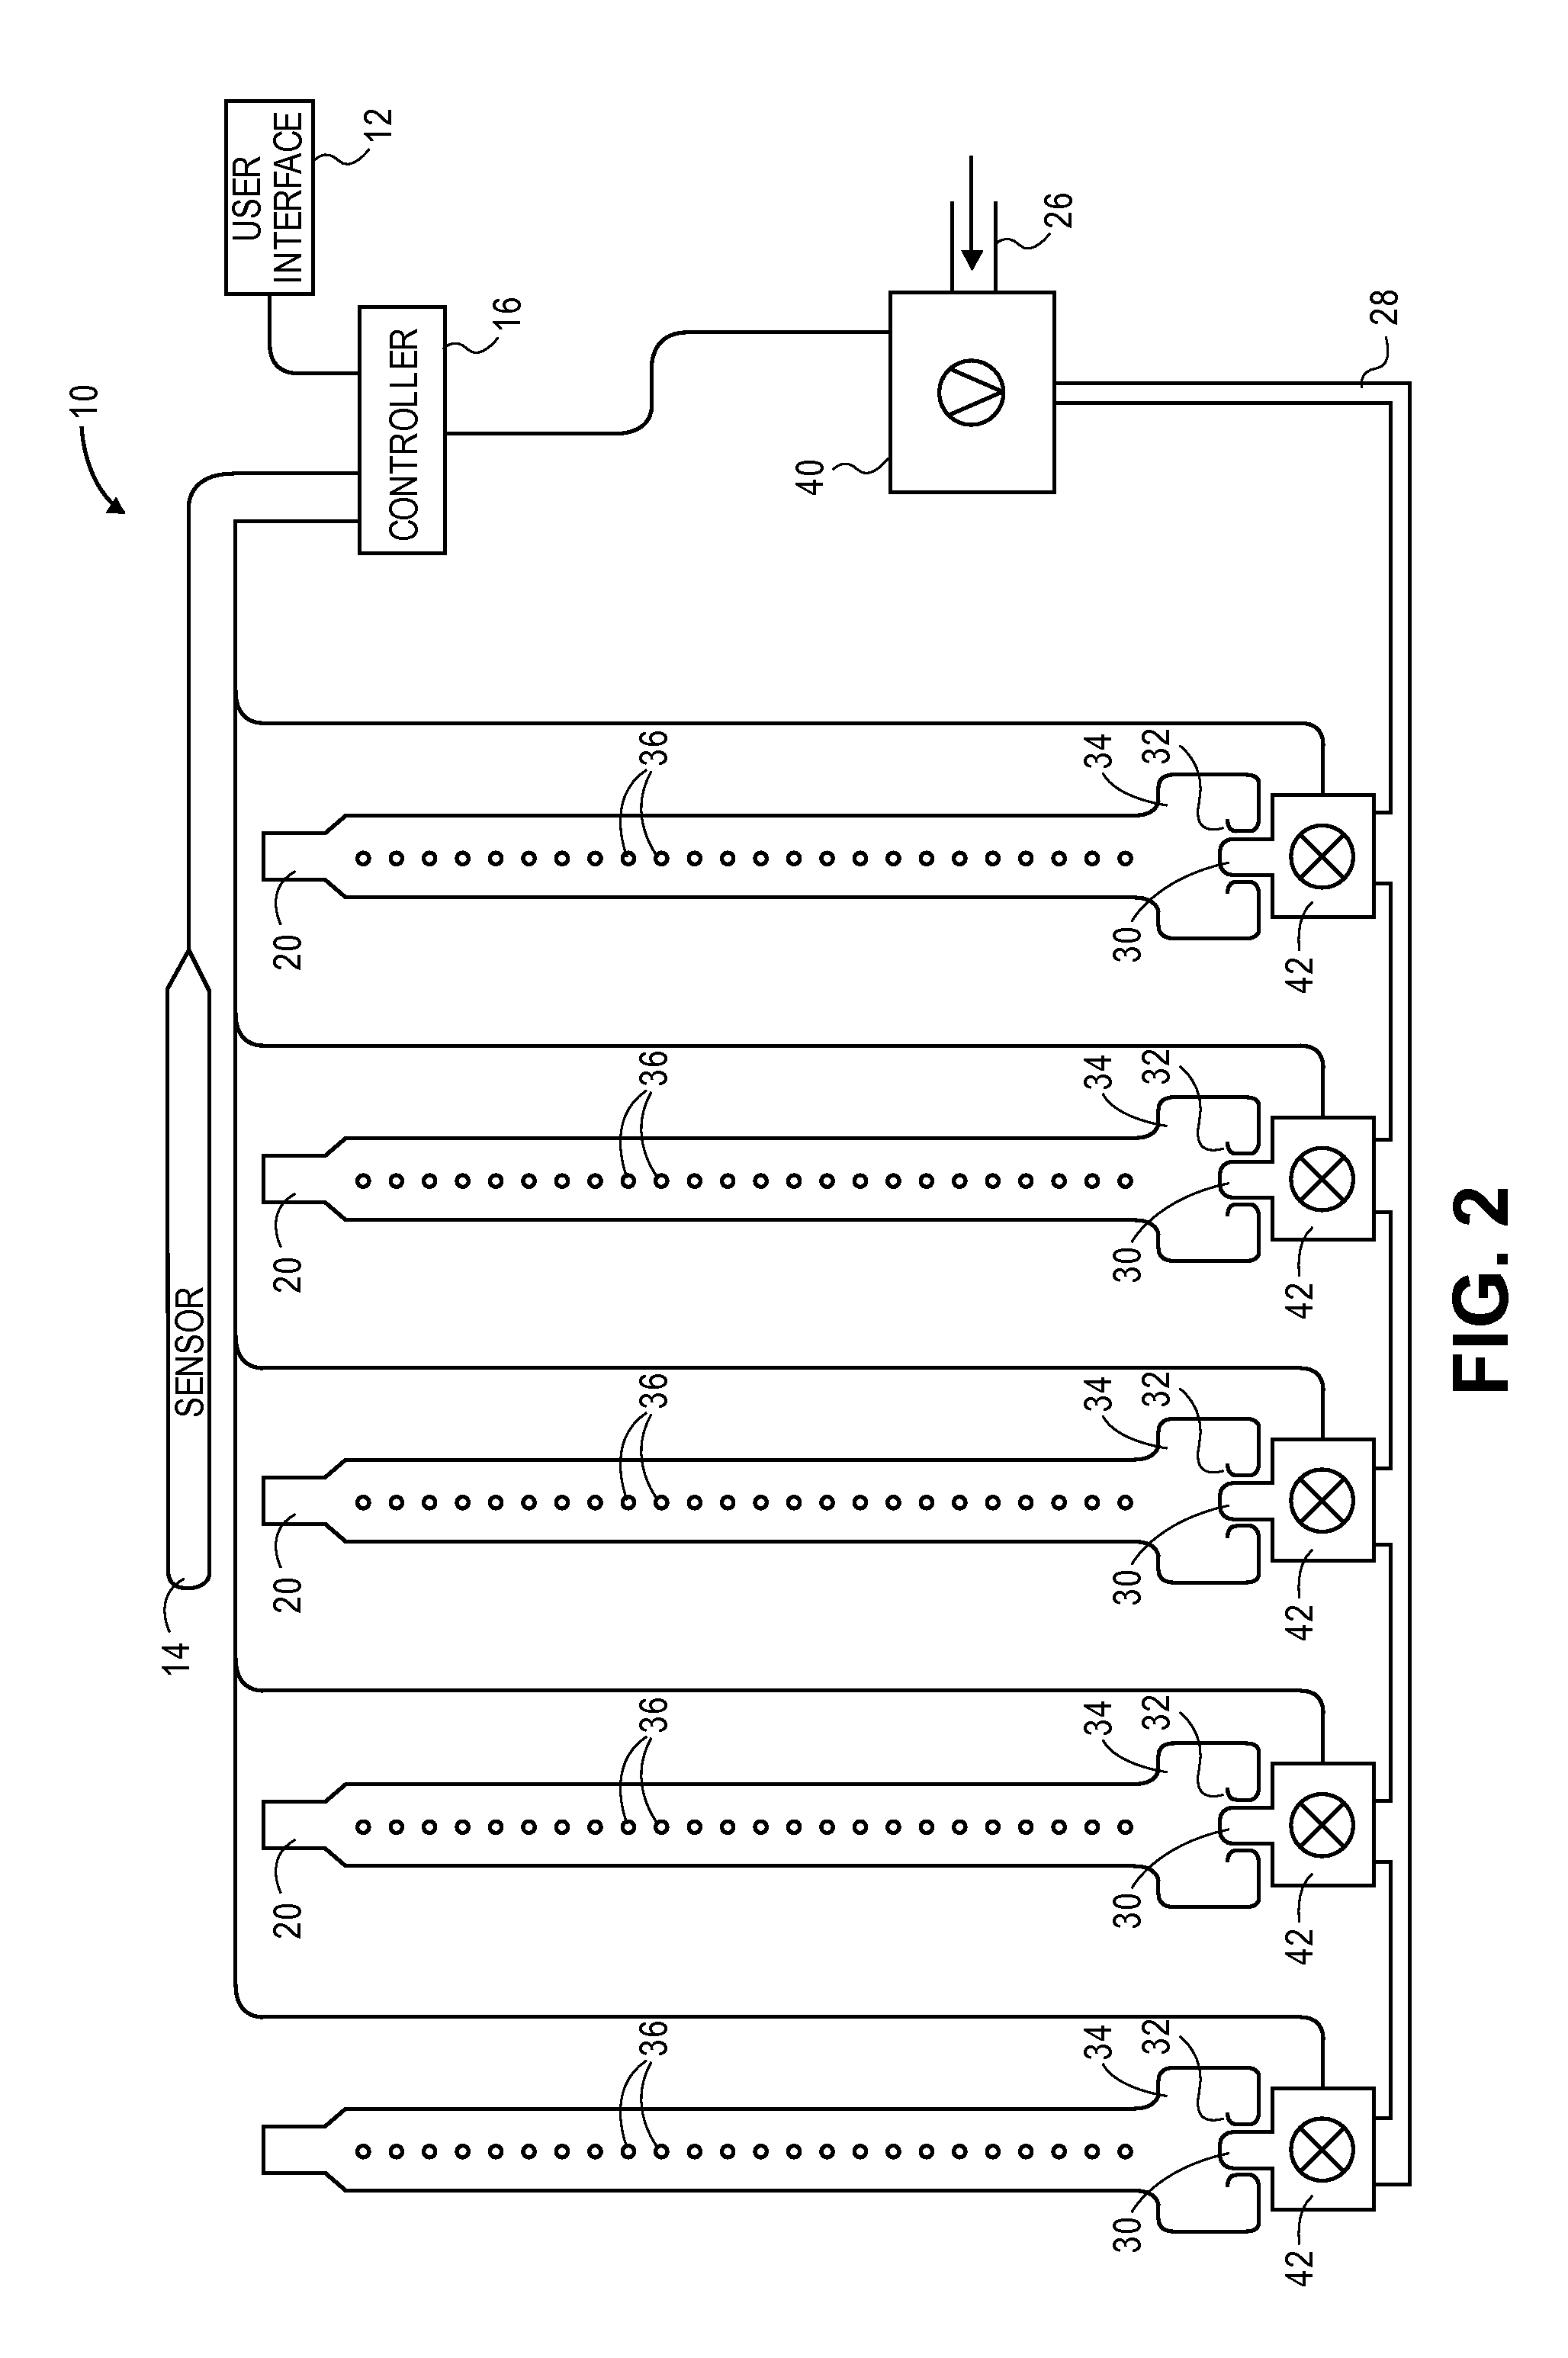 Variable output heating control system